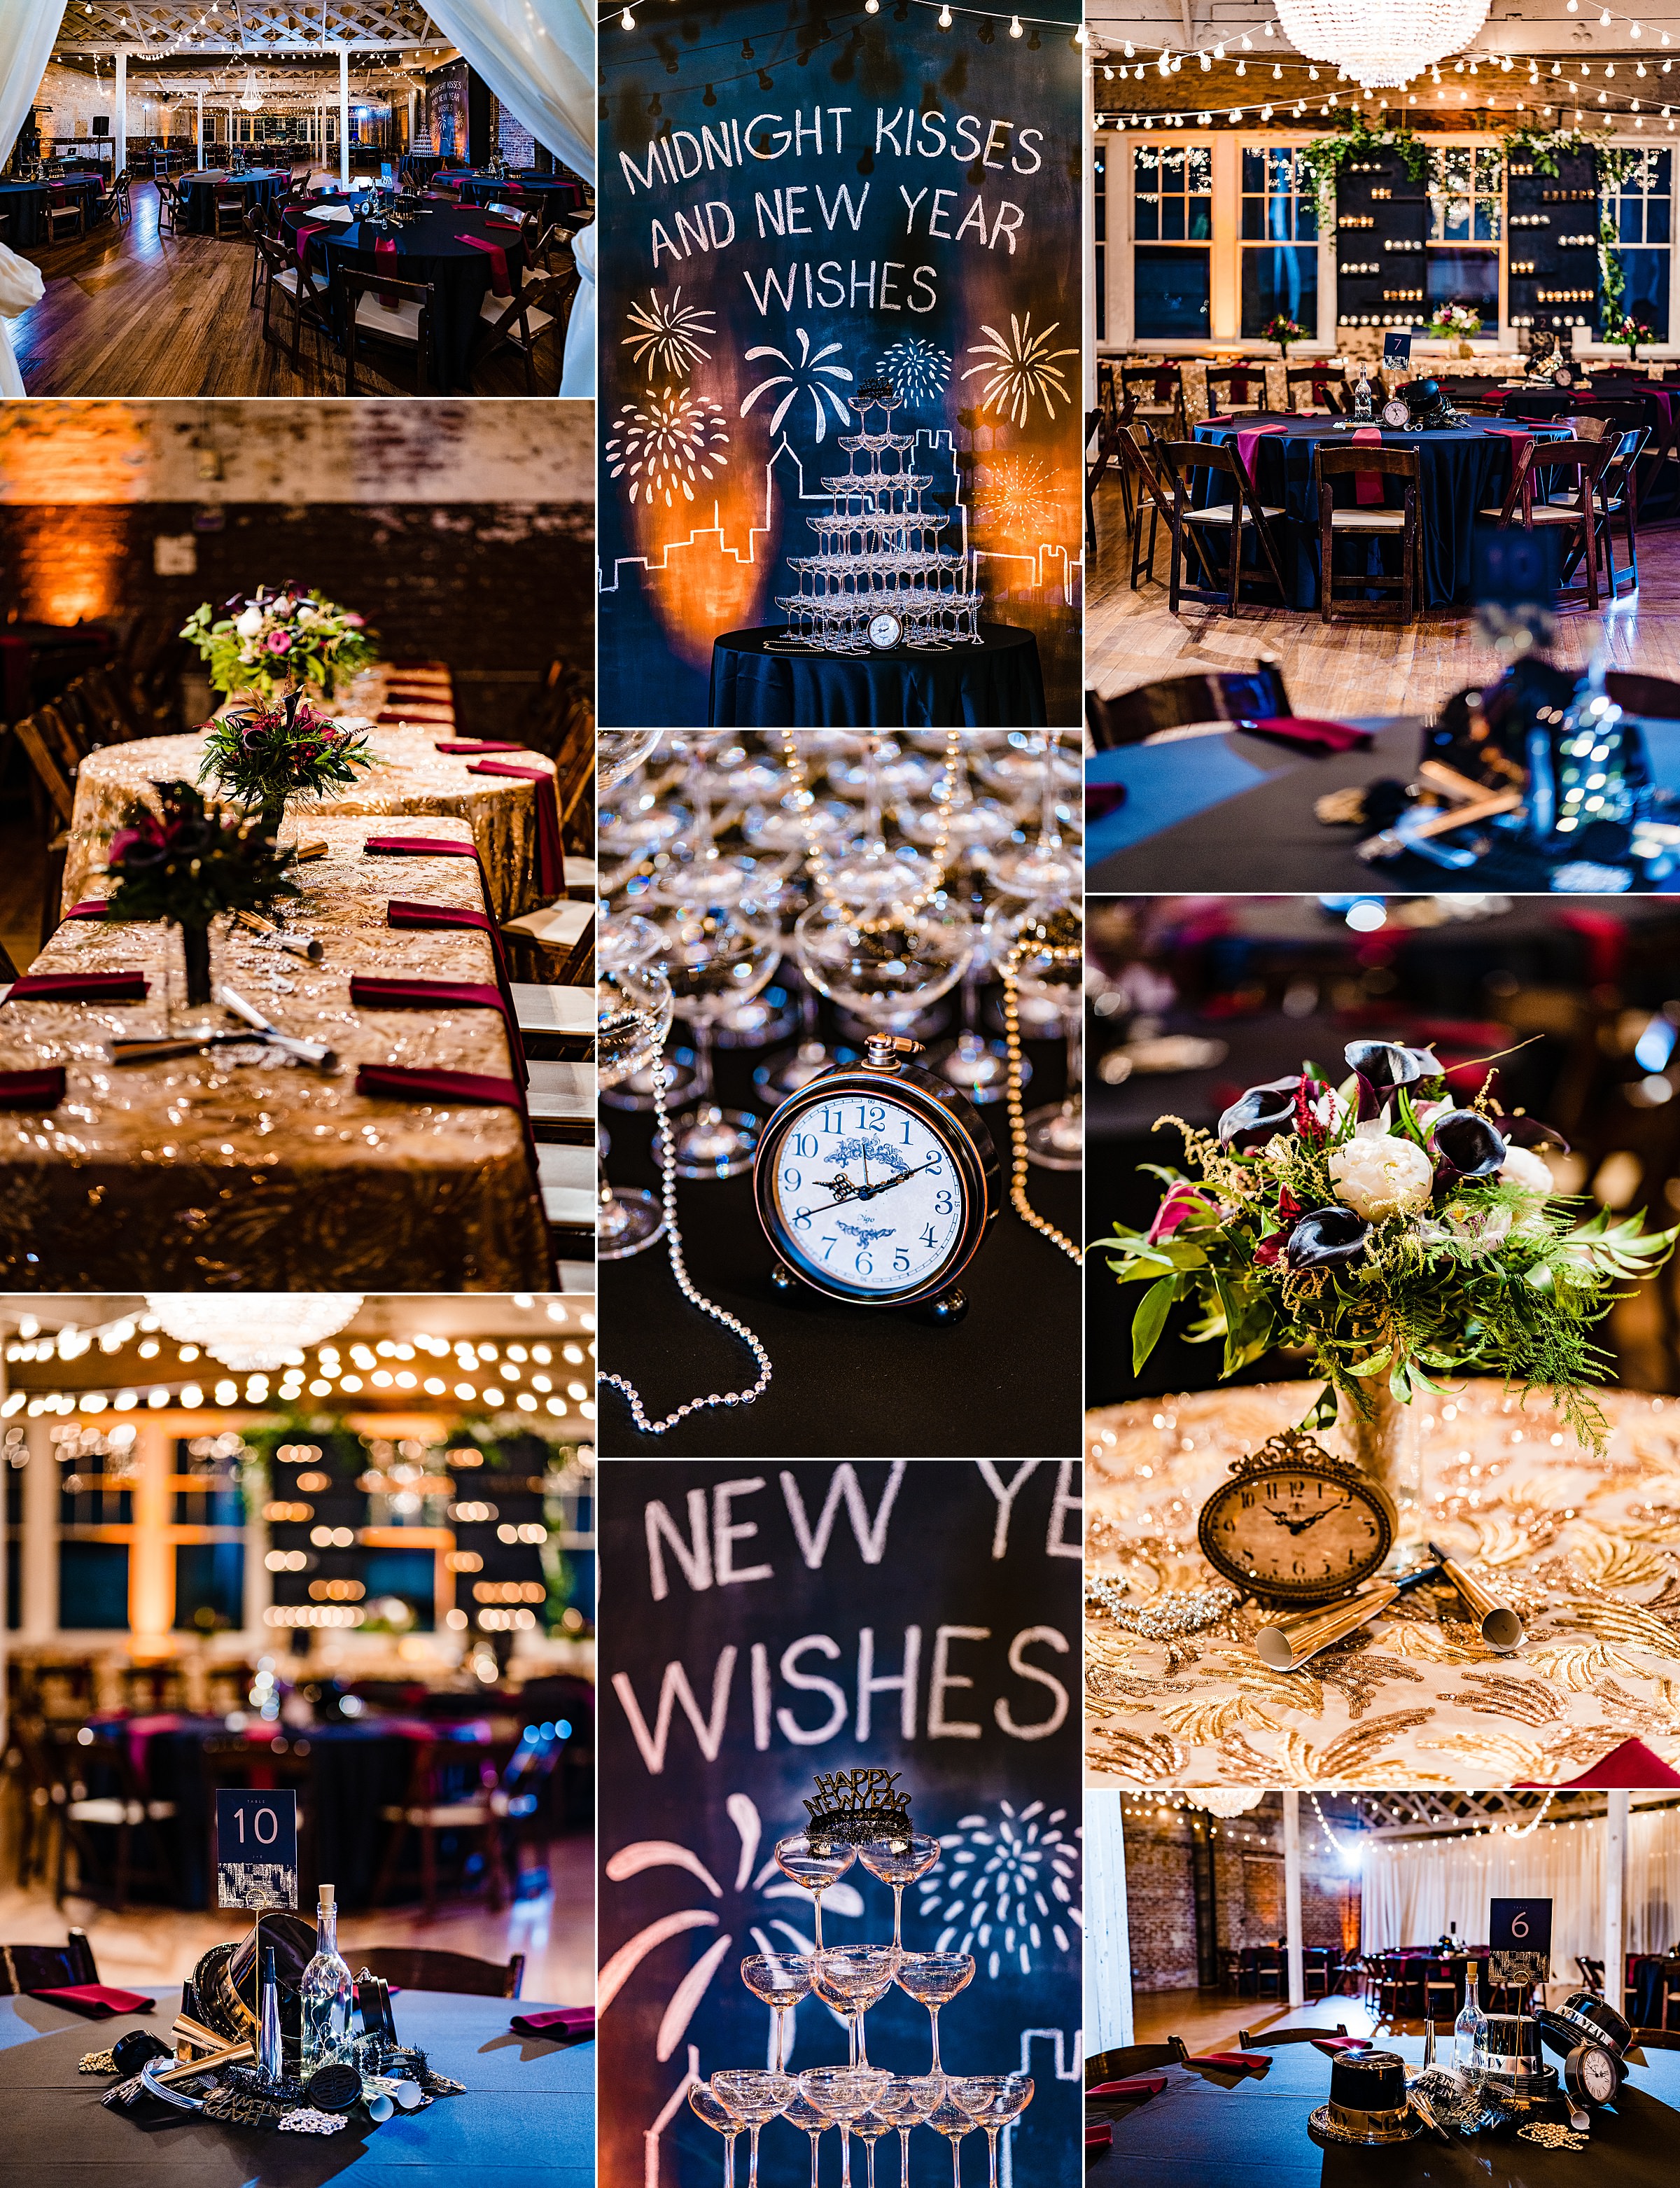 Collage of wedding reception details from a New Year's Eve wedding at The Stockroom in Raleigh. Decorations include a champagne tower, party hats, noisemakers, antique clocks, and strands of pearls | kivusandcamera.com